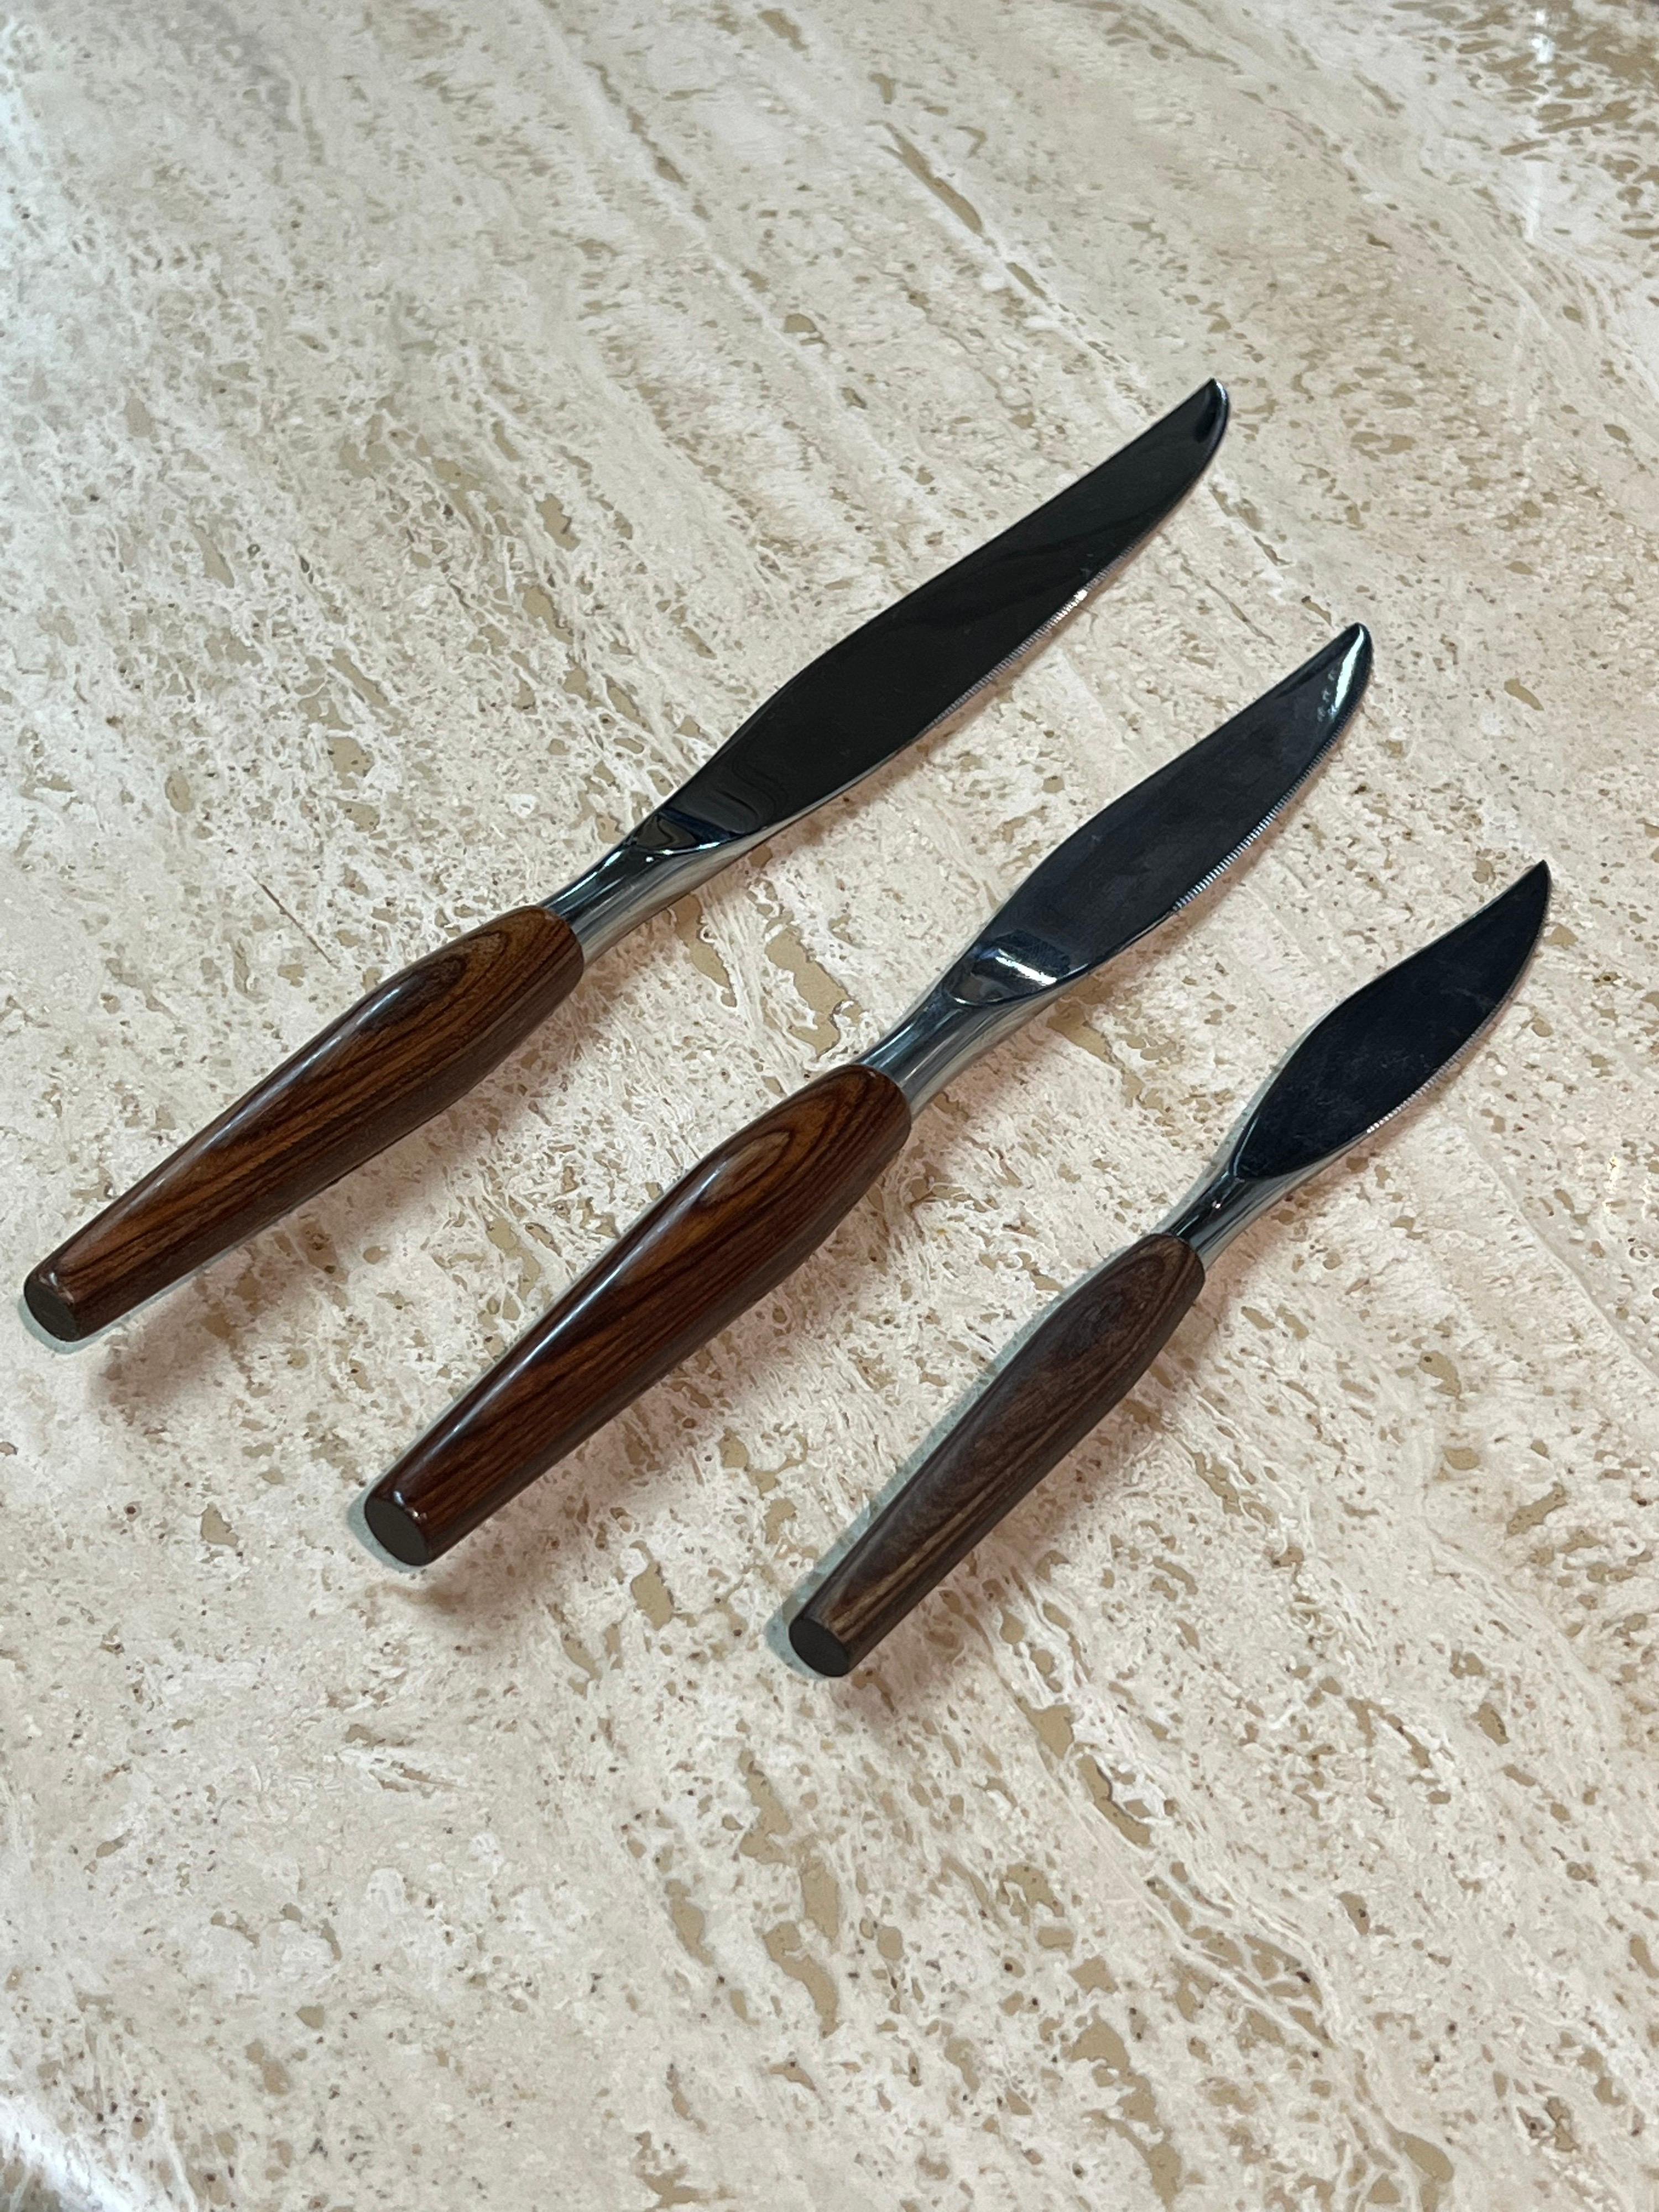 Set of three carving and all purpose stainless steel knives with rosewood handles by Sheffield of England.

Separate Dimensions:
Large: H 12.75